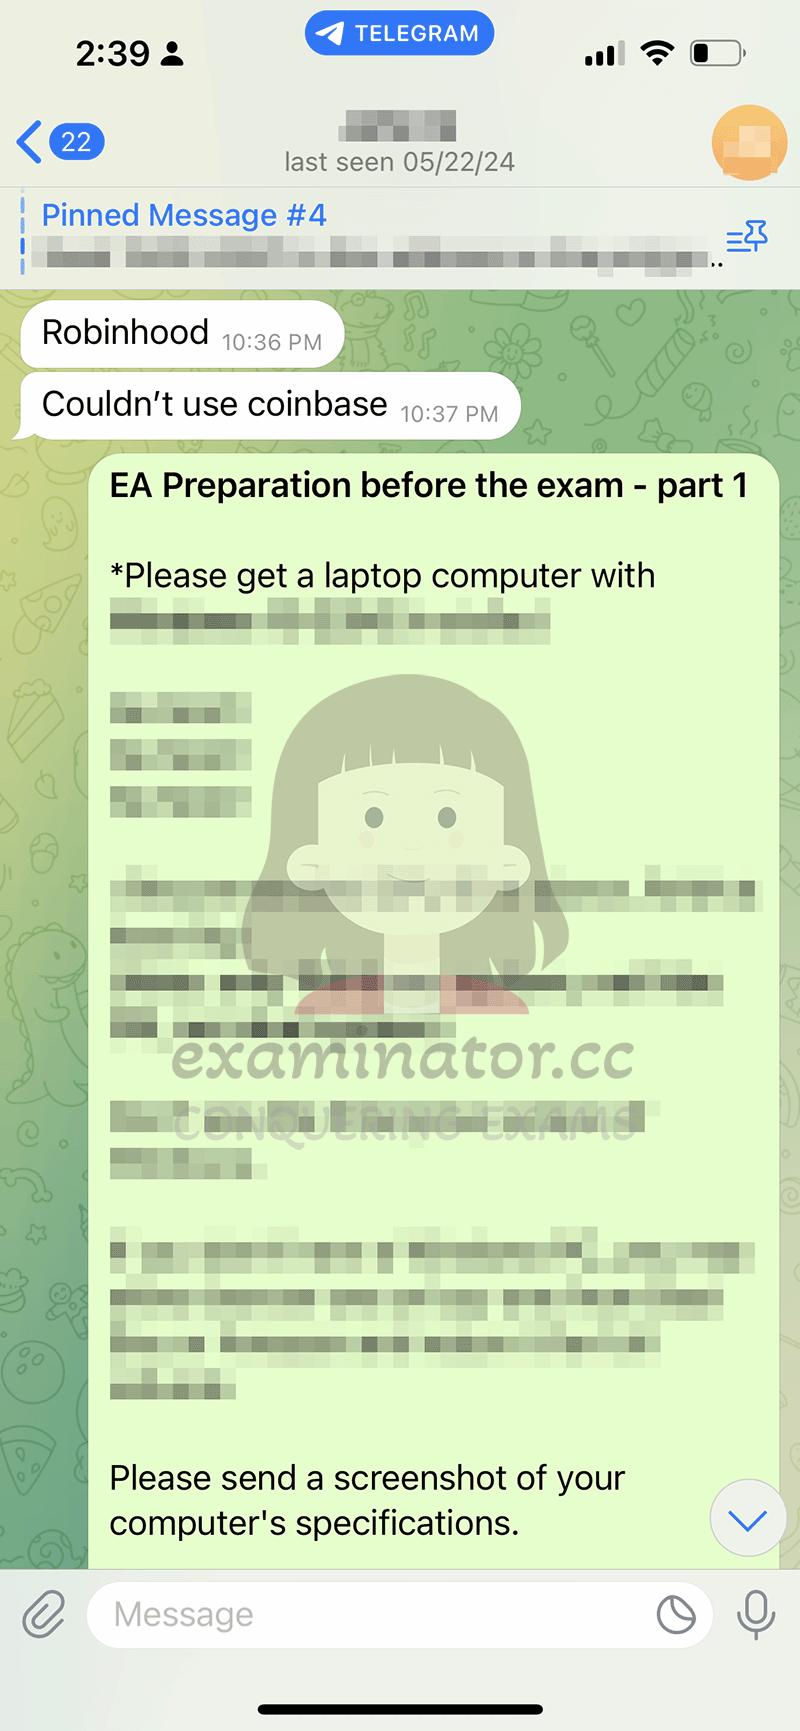 Preparation Checklist for Hiring Executive Assessment(EA) Proxy Test Takers